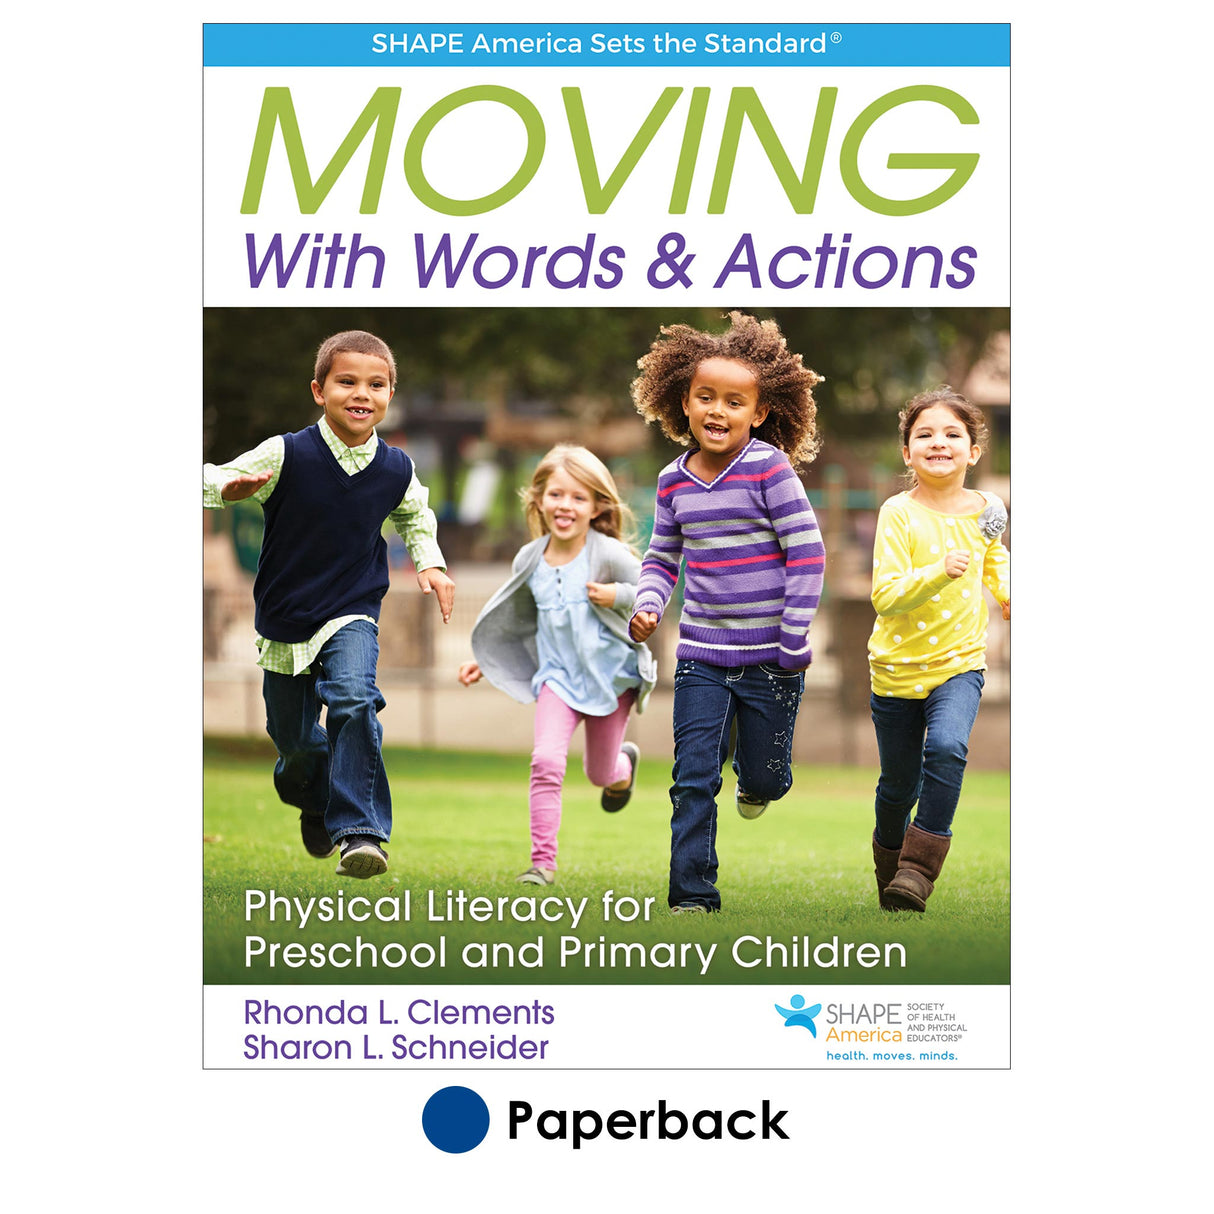 Moving with Words & Actions